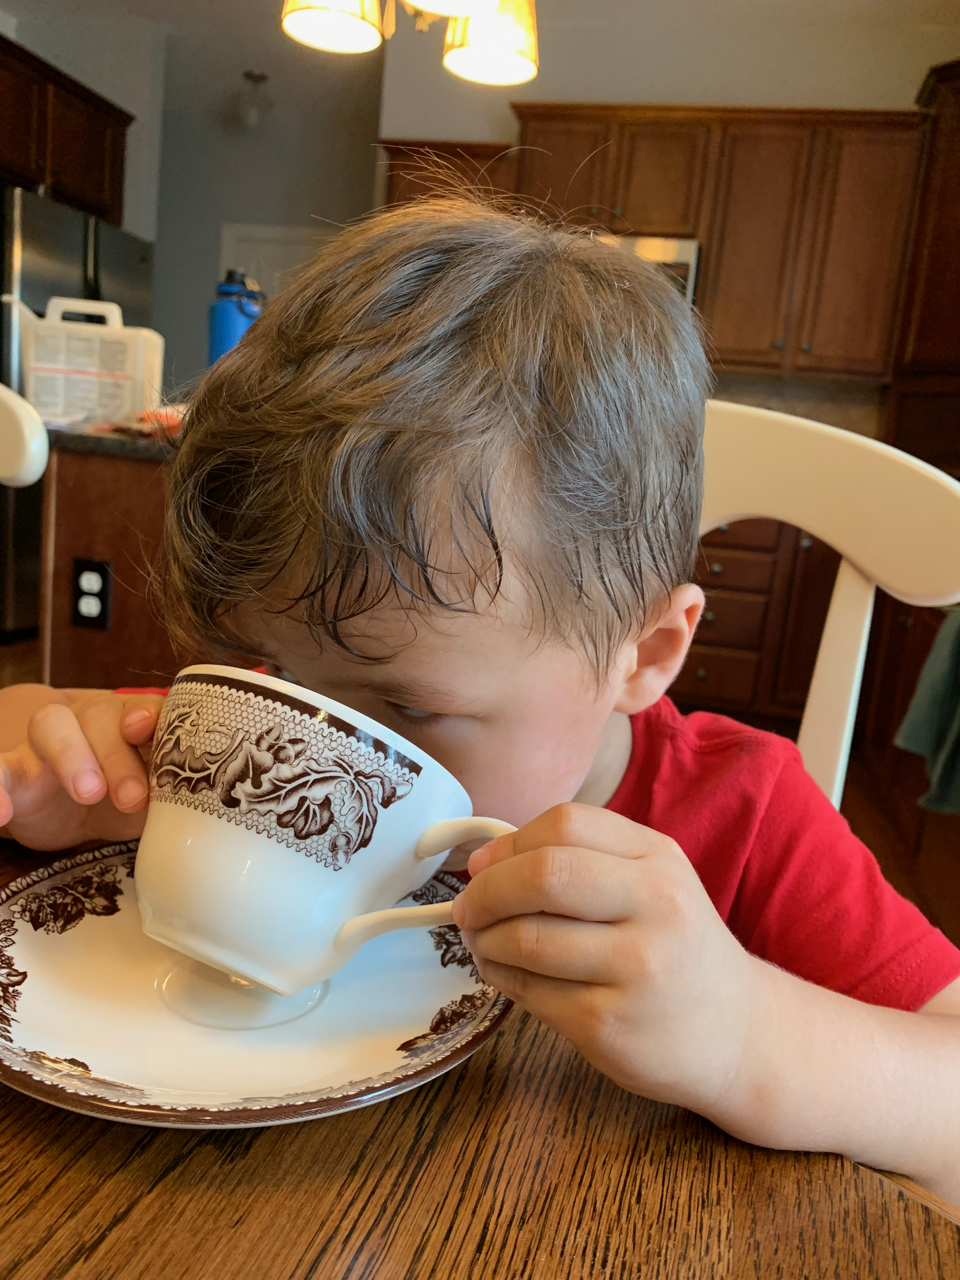 Even the little one has a teacup